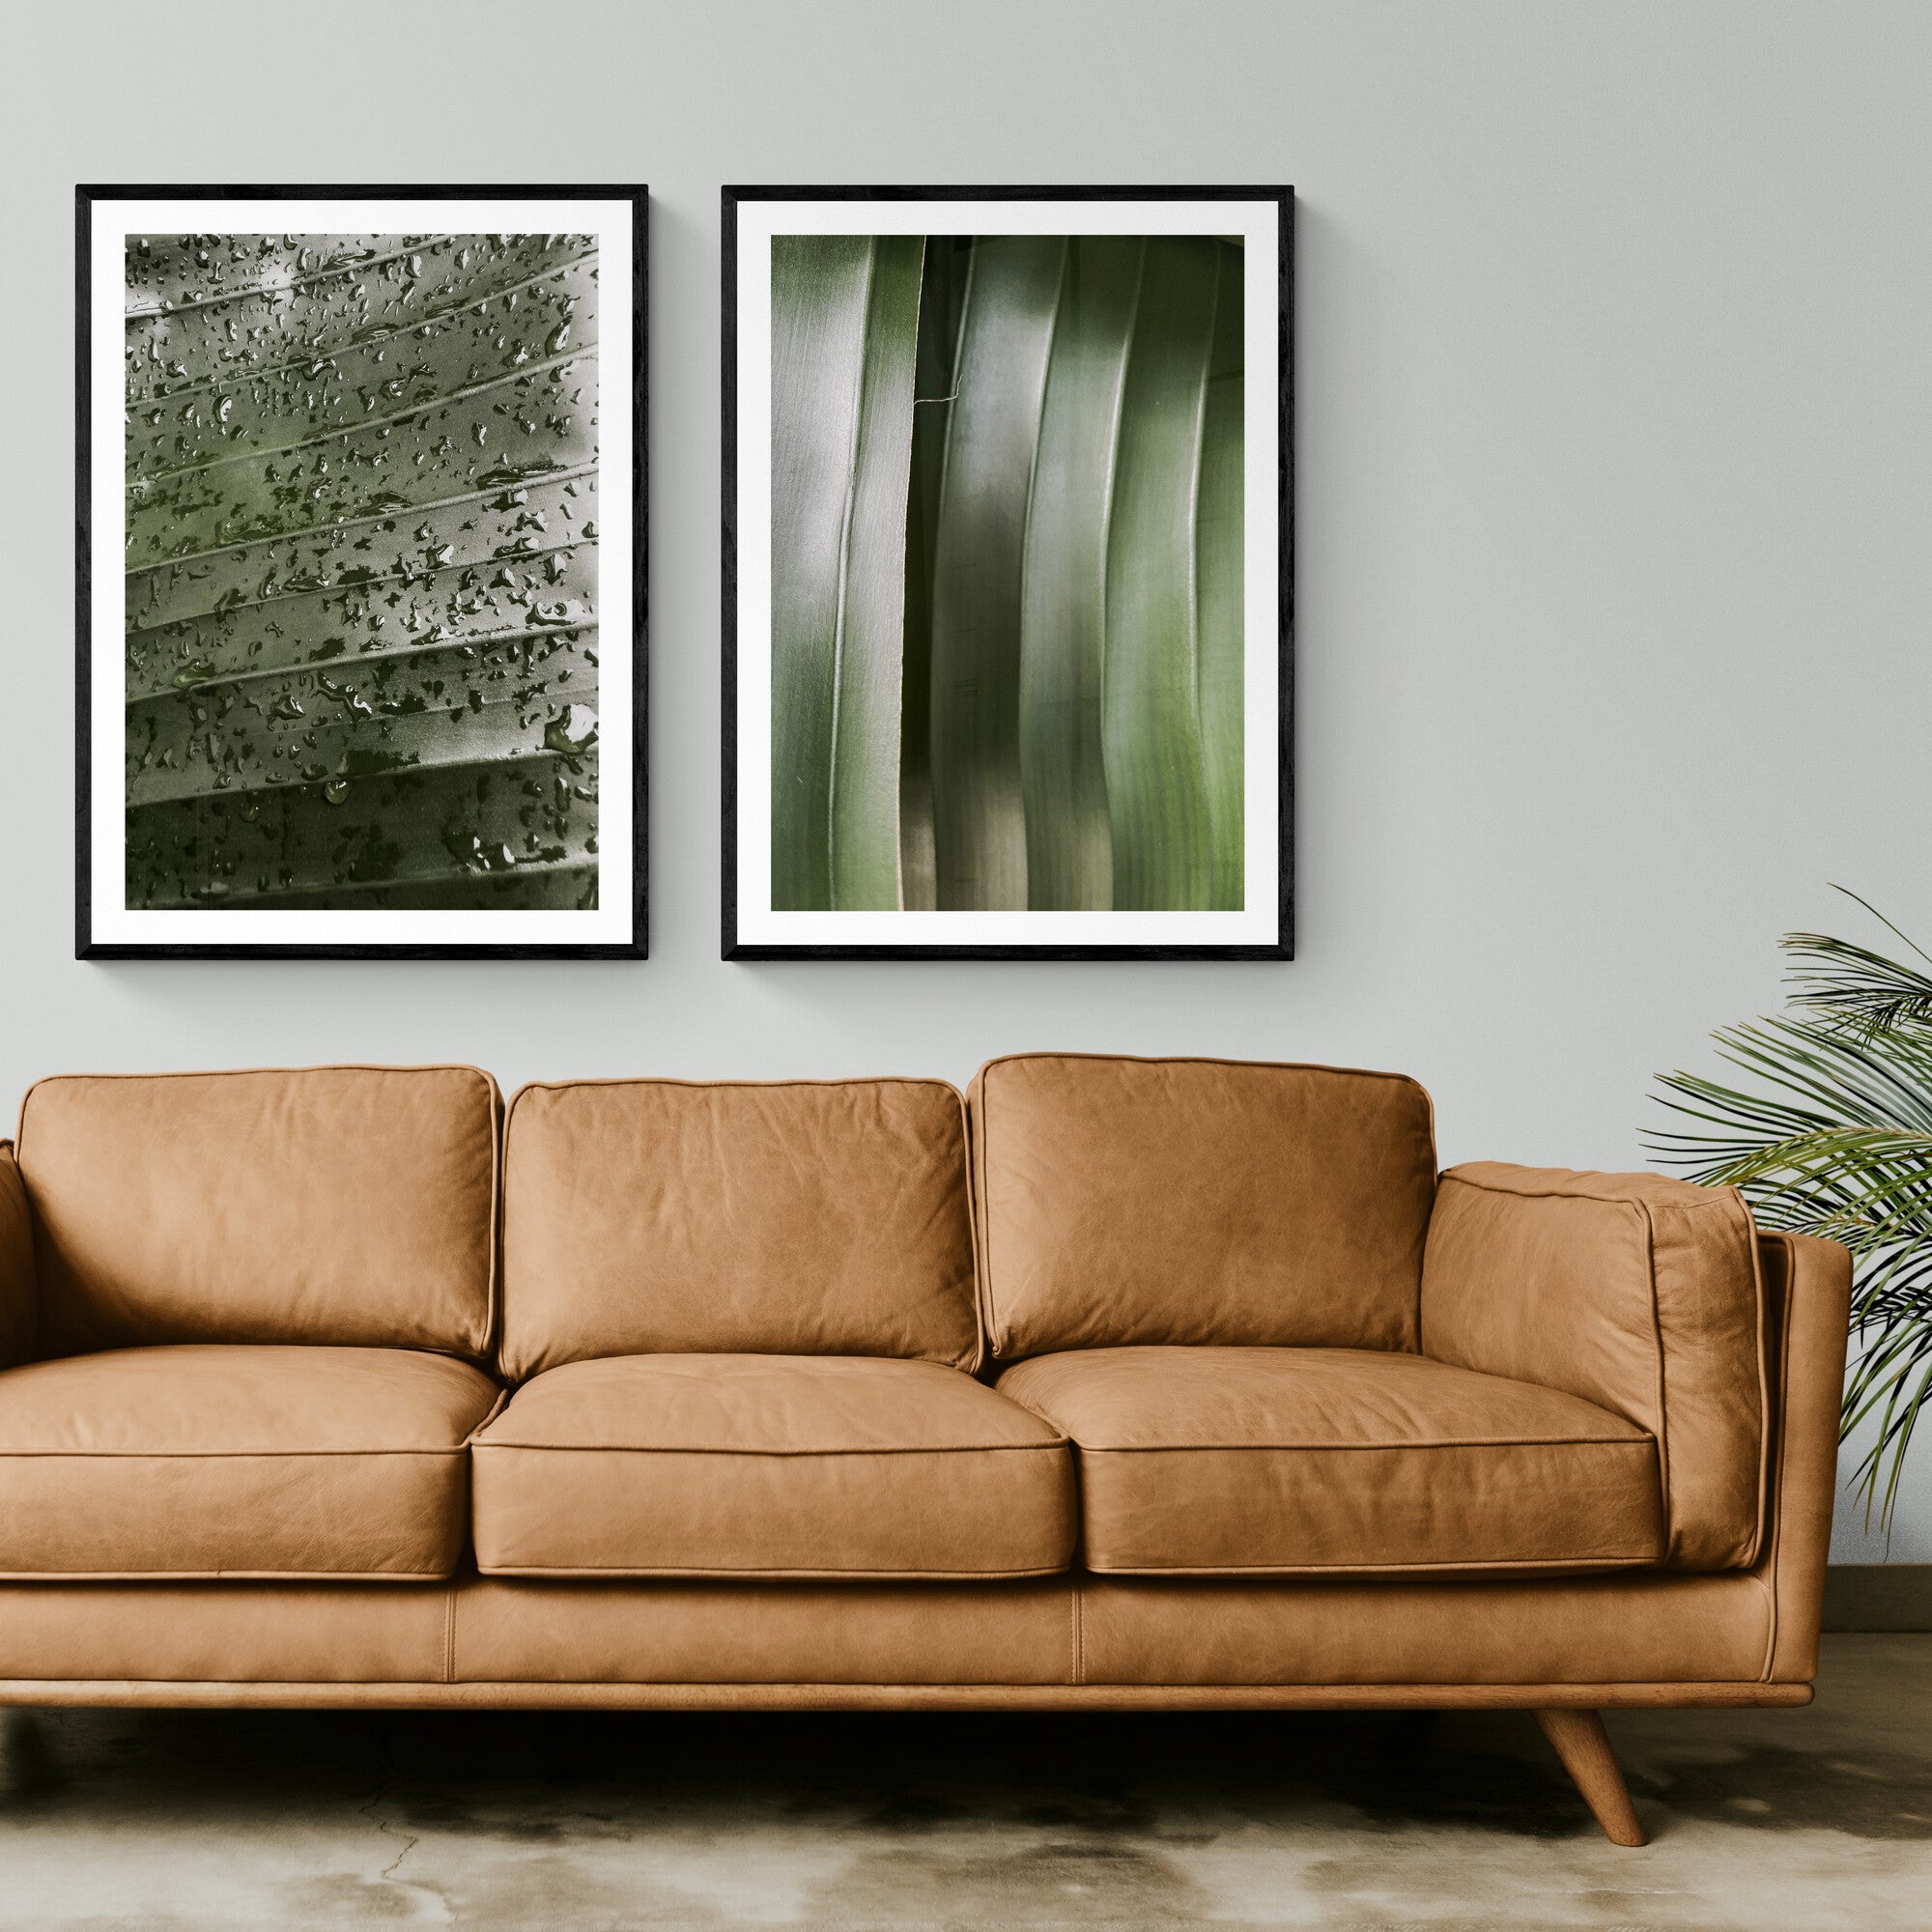 Botanical Framed Photography For Your Home Decor